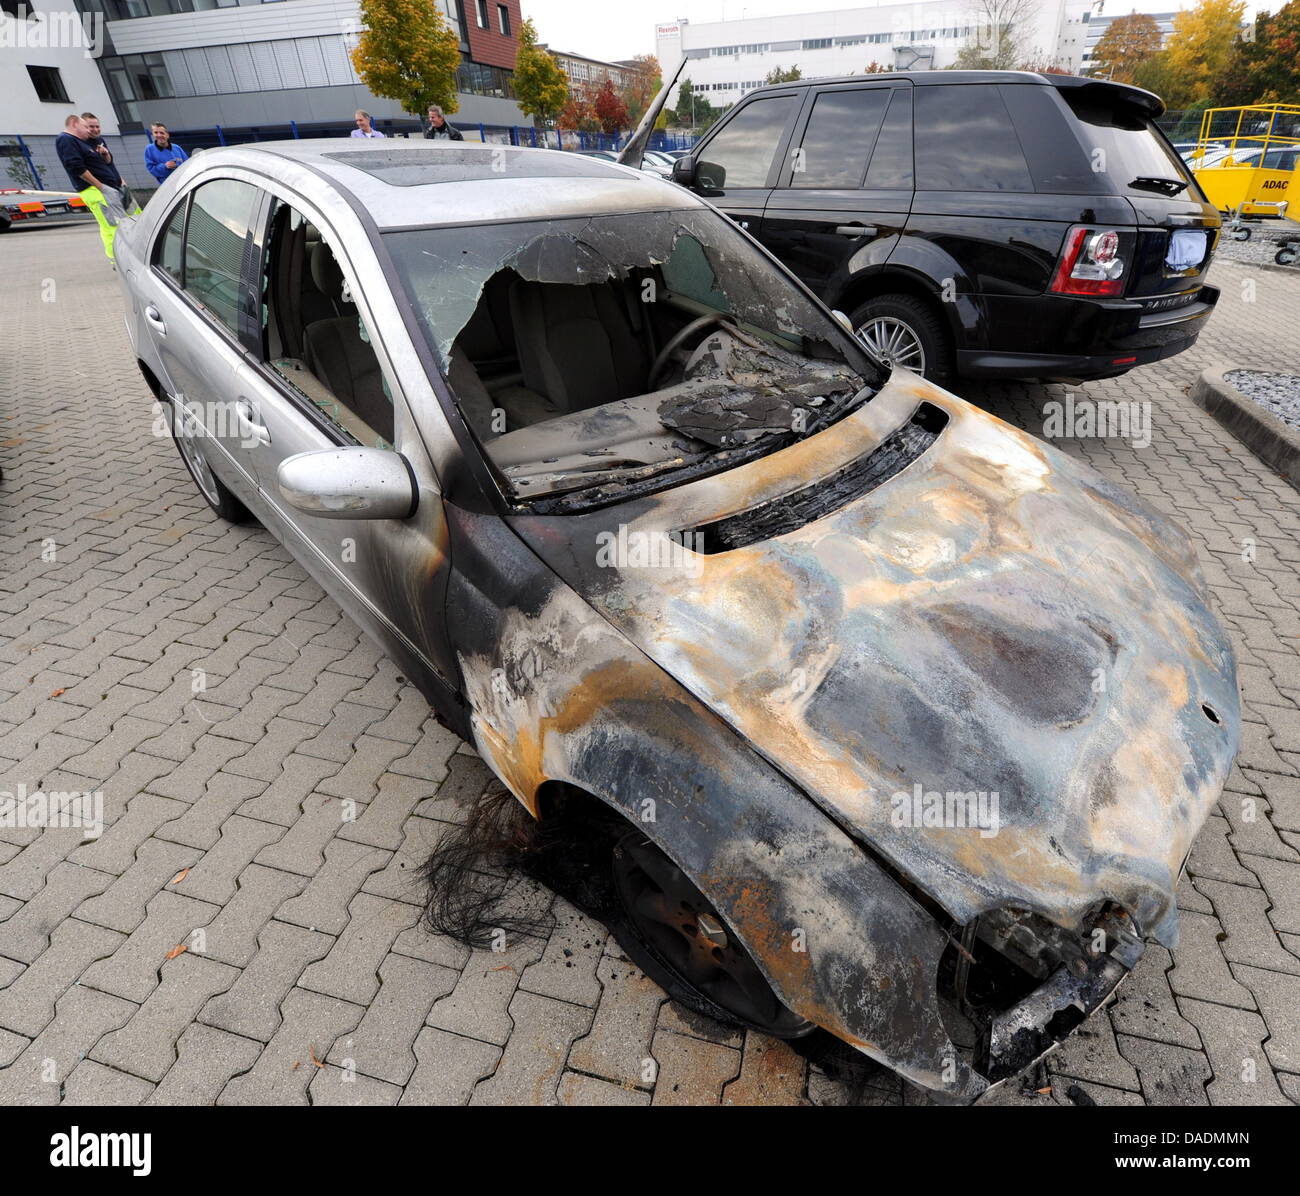 Burned-out cars are parked in Stuttgart, Germany, 30 October 2011. Once again, cars were set on fire oin Baden-Wuerttemberg's capital. According to the Stuttgart police, three cars worth 150,000 euros were set on fire in northern Stuttgart. Photo: Bernd Weissbrod Stock Photo